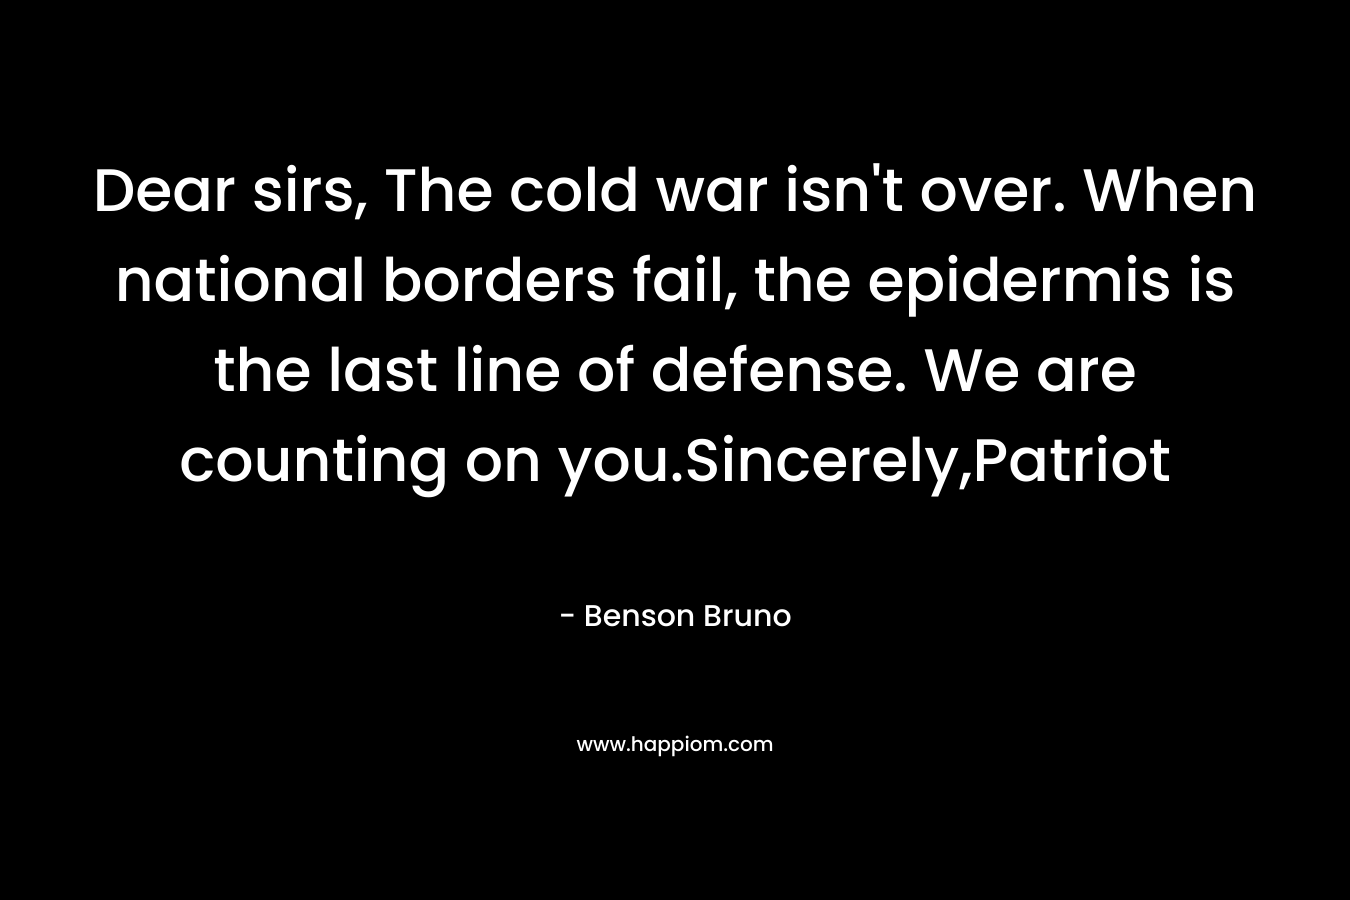 Dear sirs, The cold war isn't over. When national borders fail, the epidermis is the last line of defense. We are counting on you.Sincerely,Patriot